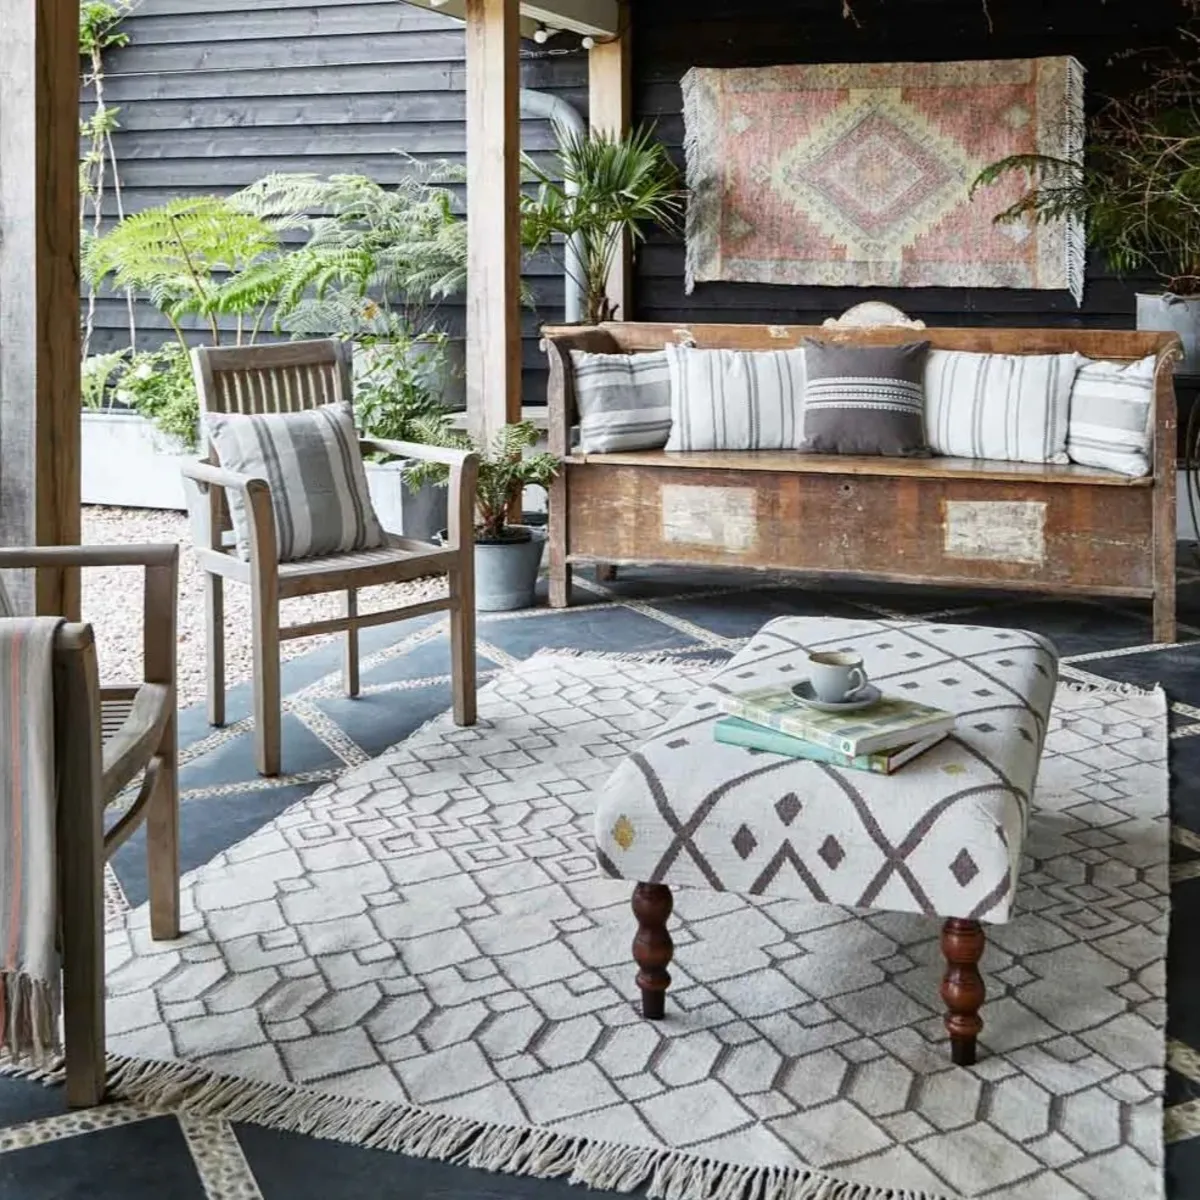 Outdoor room set up with rug, ottoman, sofa and chairs